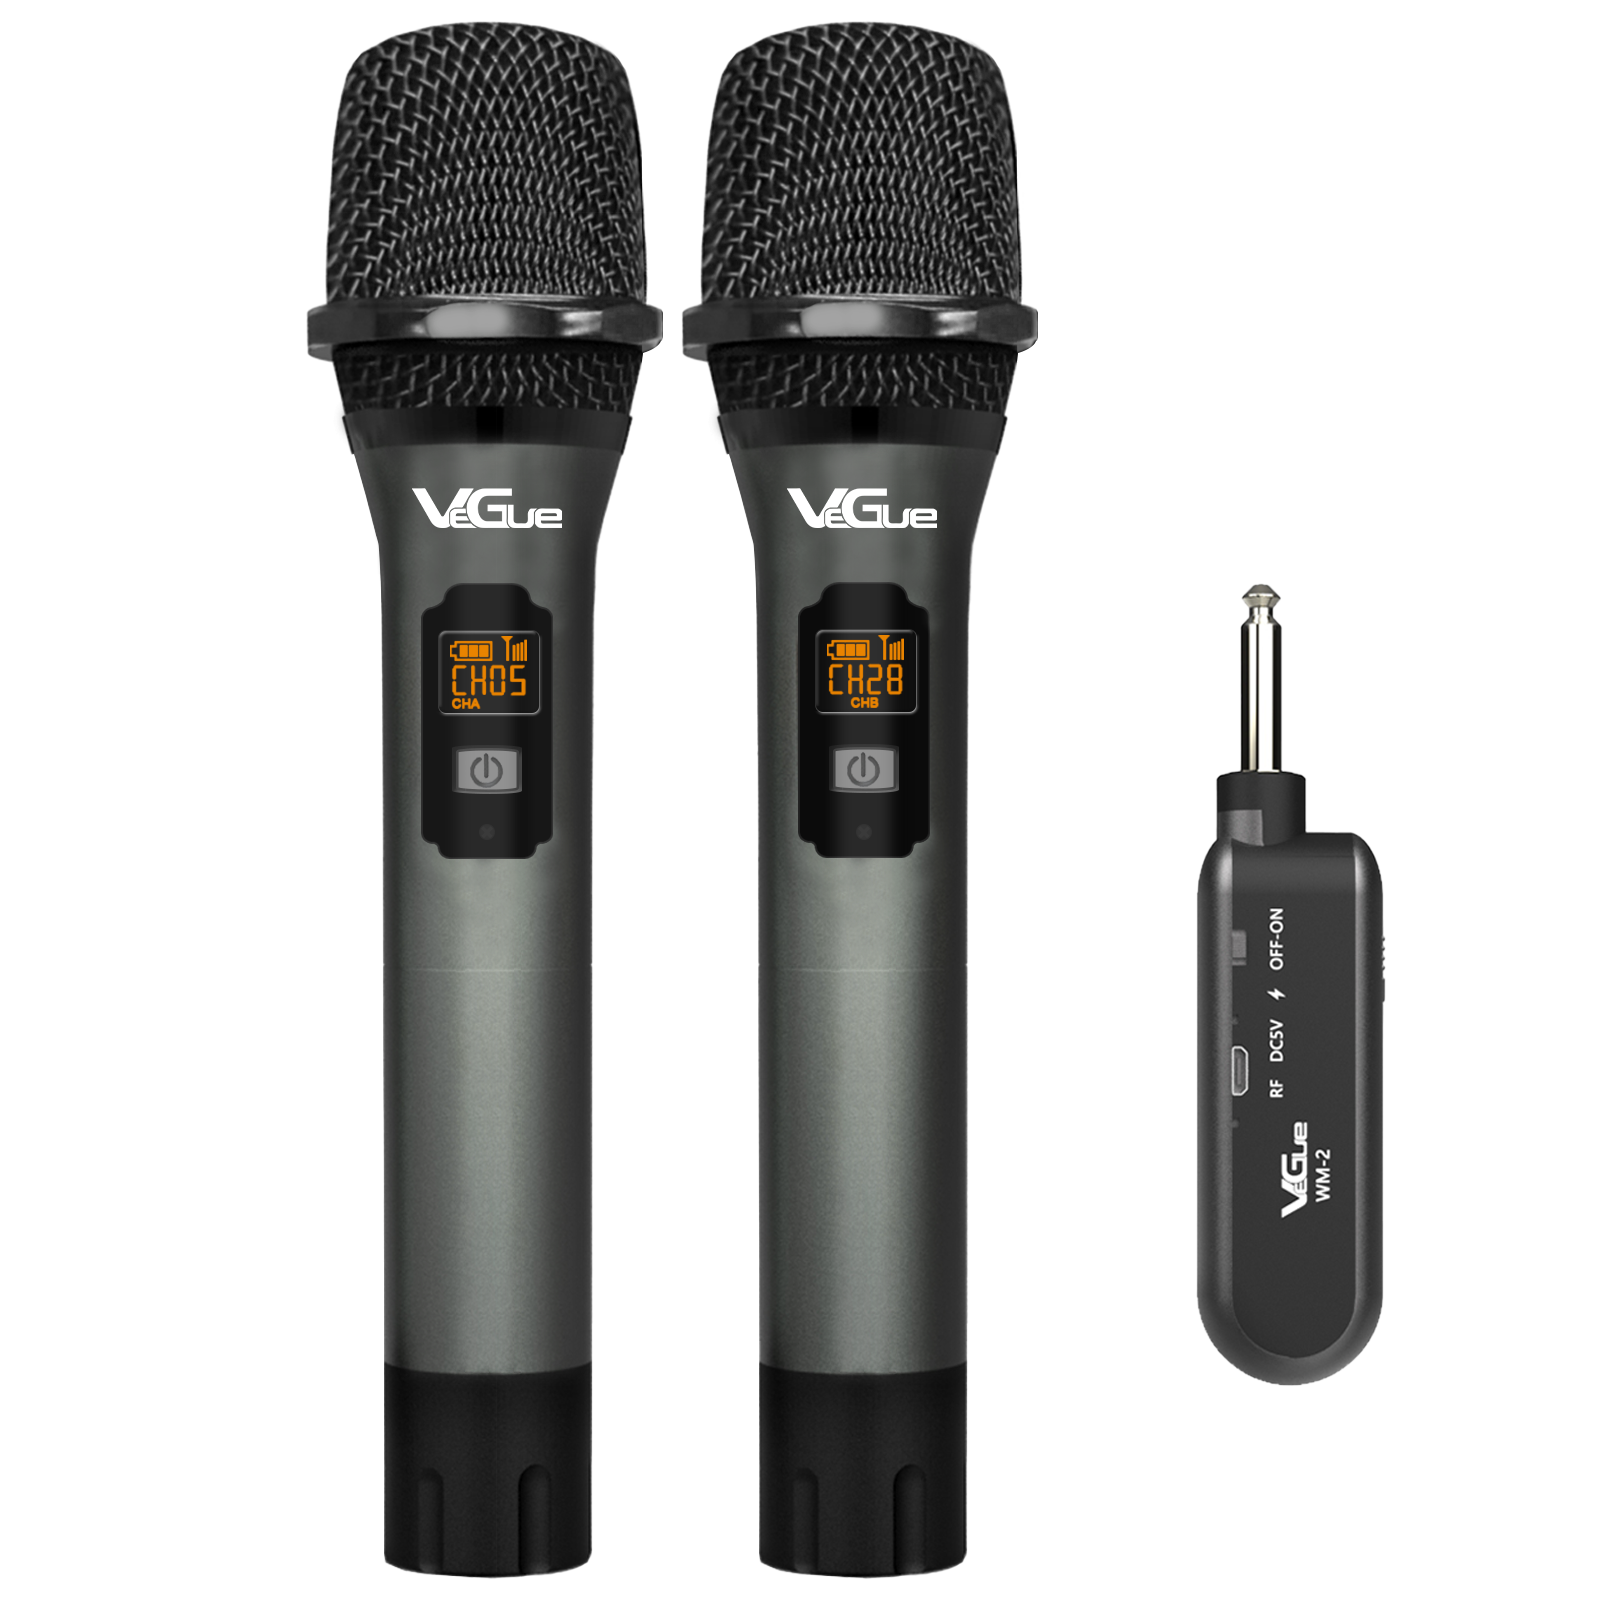 VEGUE UHF Wireless Microphone with Rechargeable Receiver – VuiGue | Portable Karaoke Machines & /USB Microphones